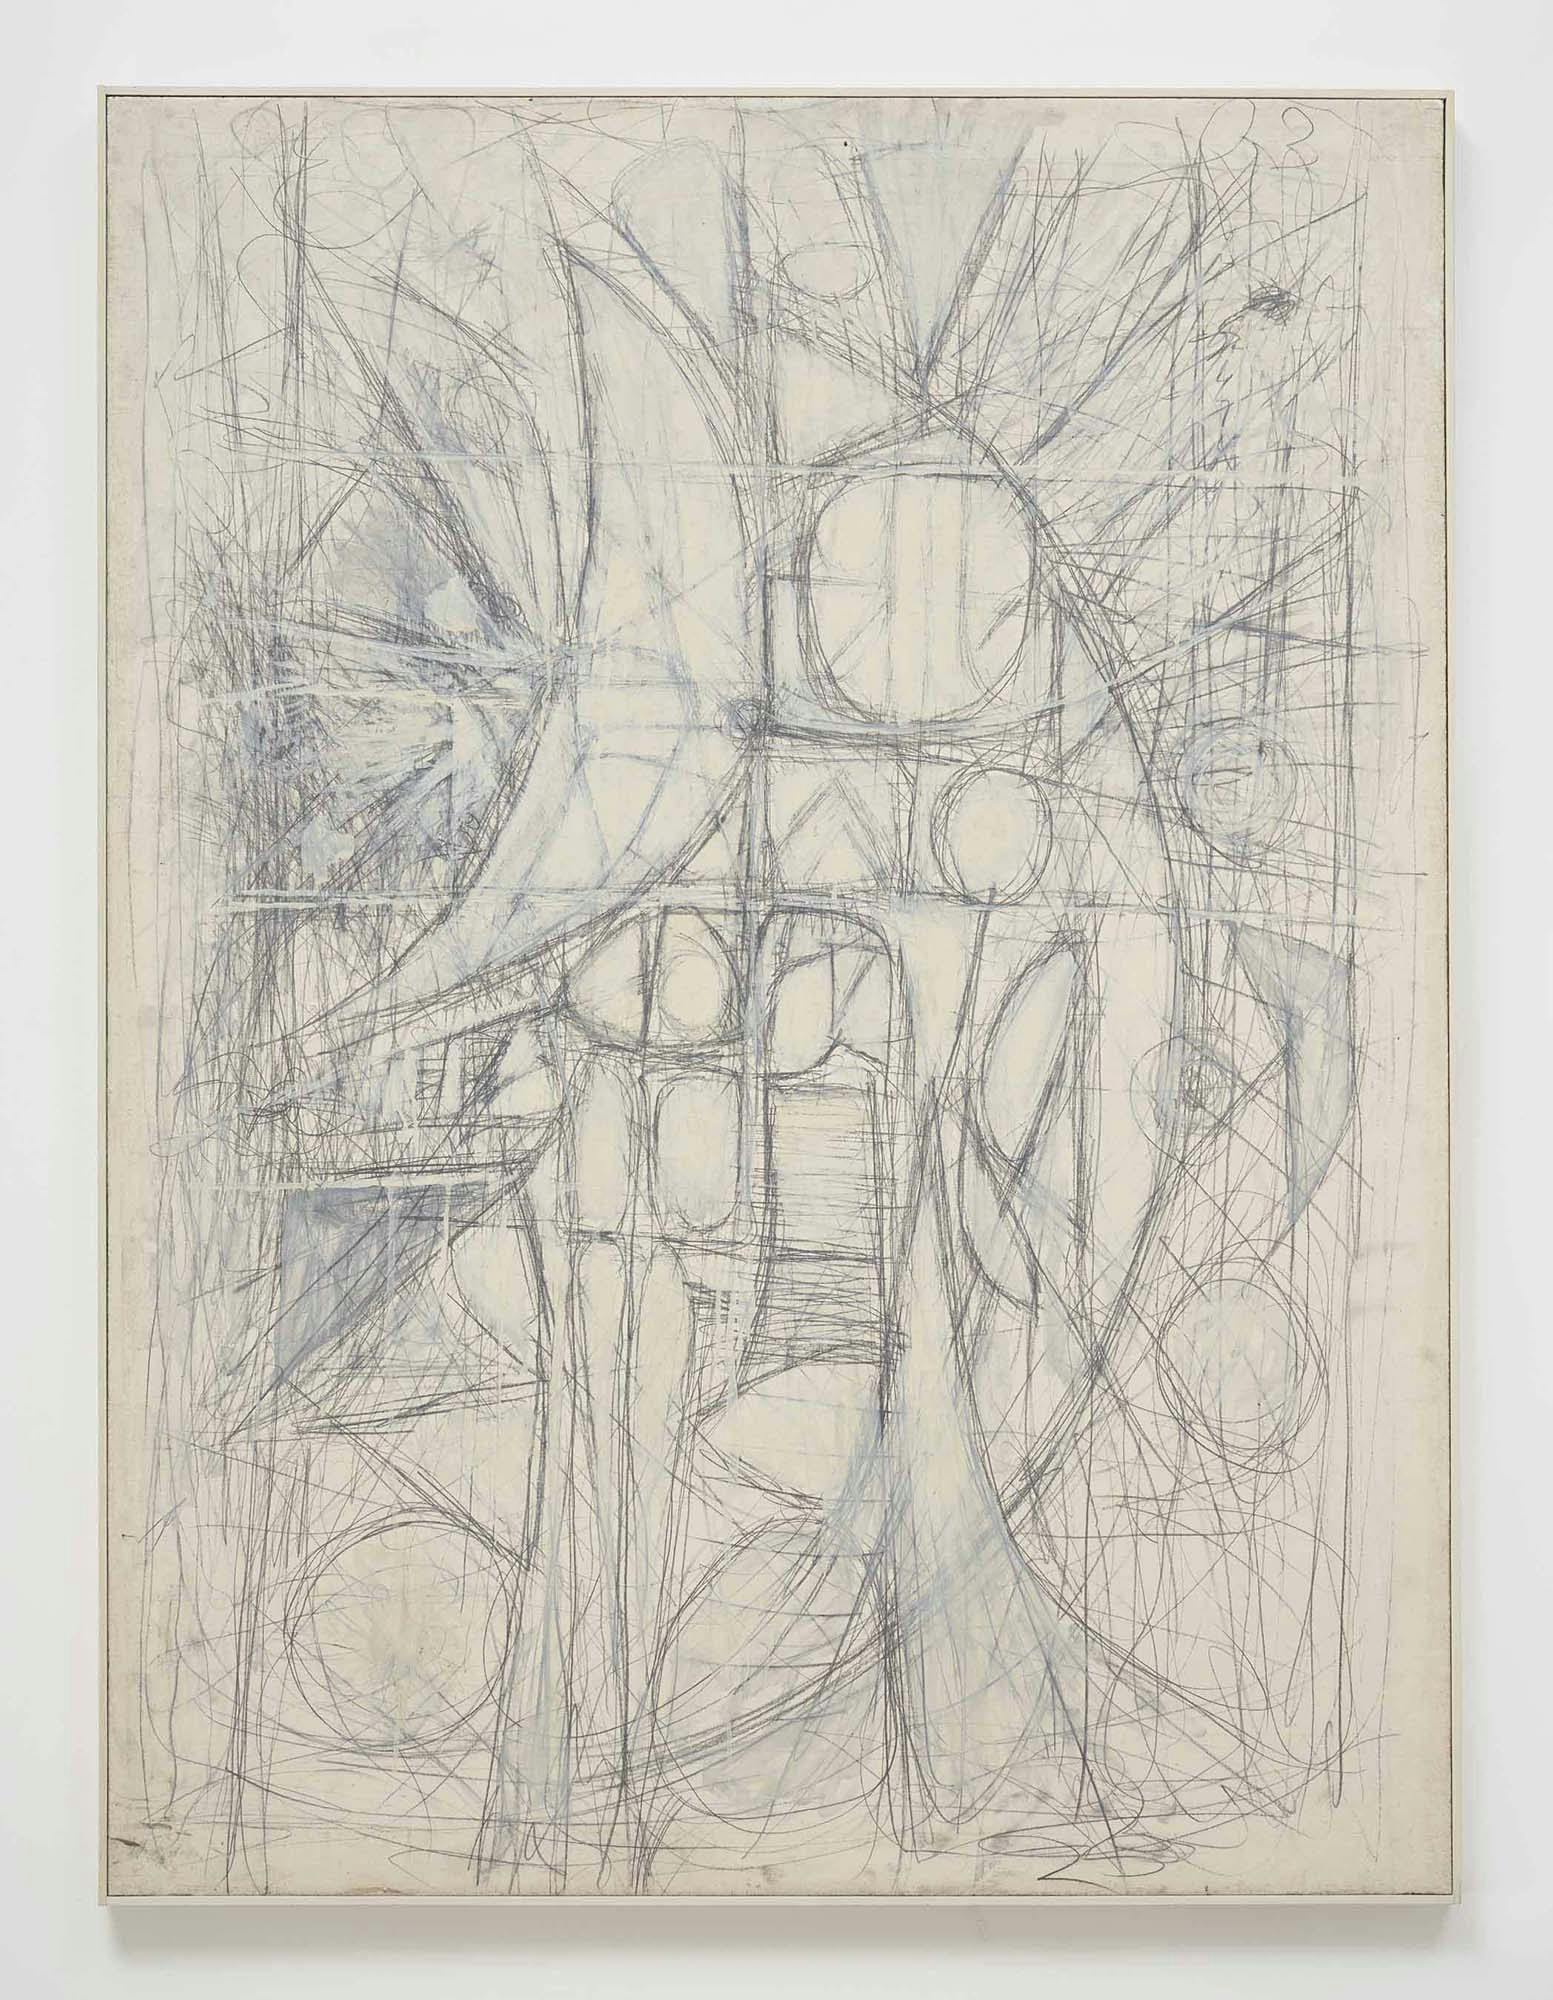 White Etude
1952
Oil and graphite on linen
49 1/2 x 36 3/4 in. (125.7 x 93.3 cm)
 – The Richard Pousette-Dart Foundation